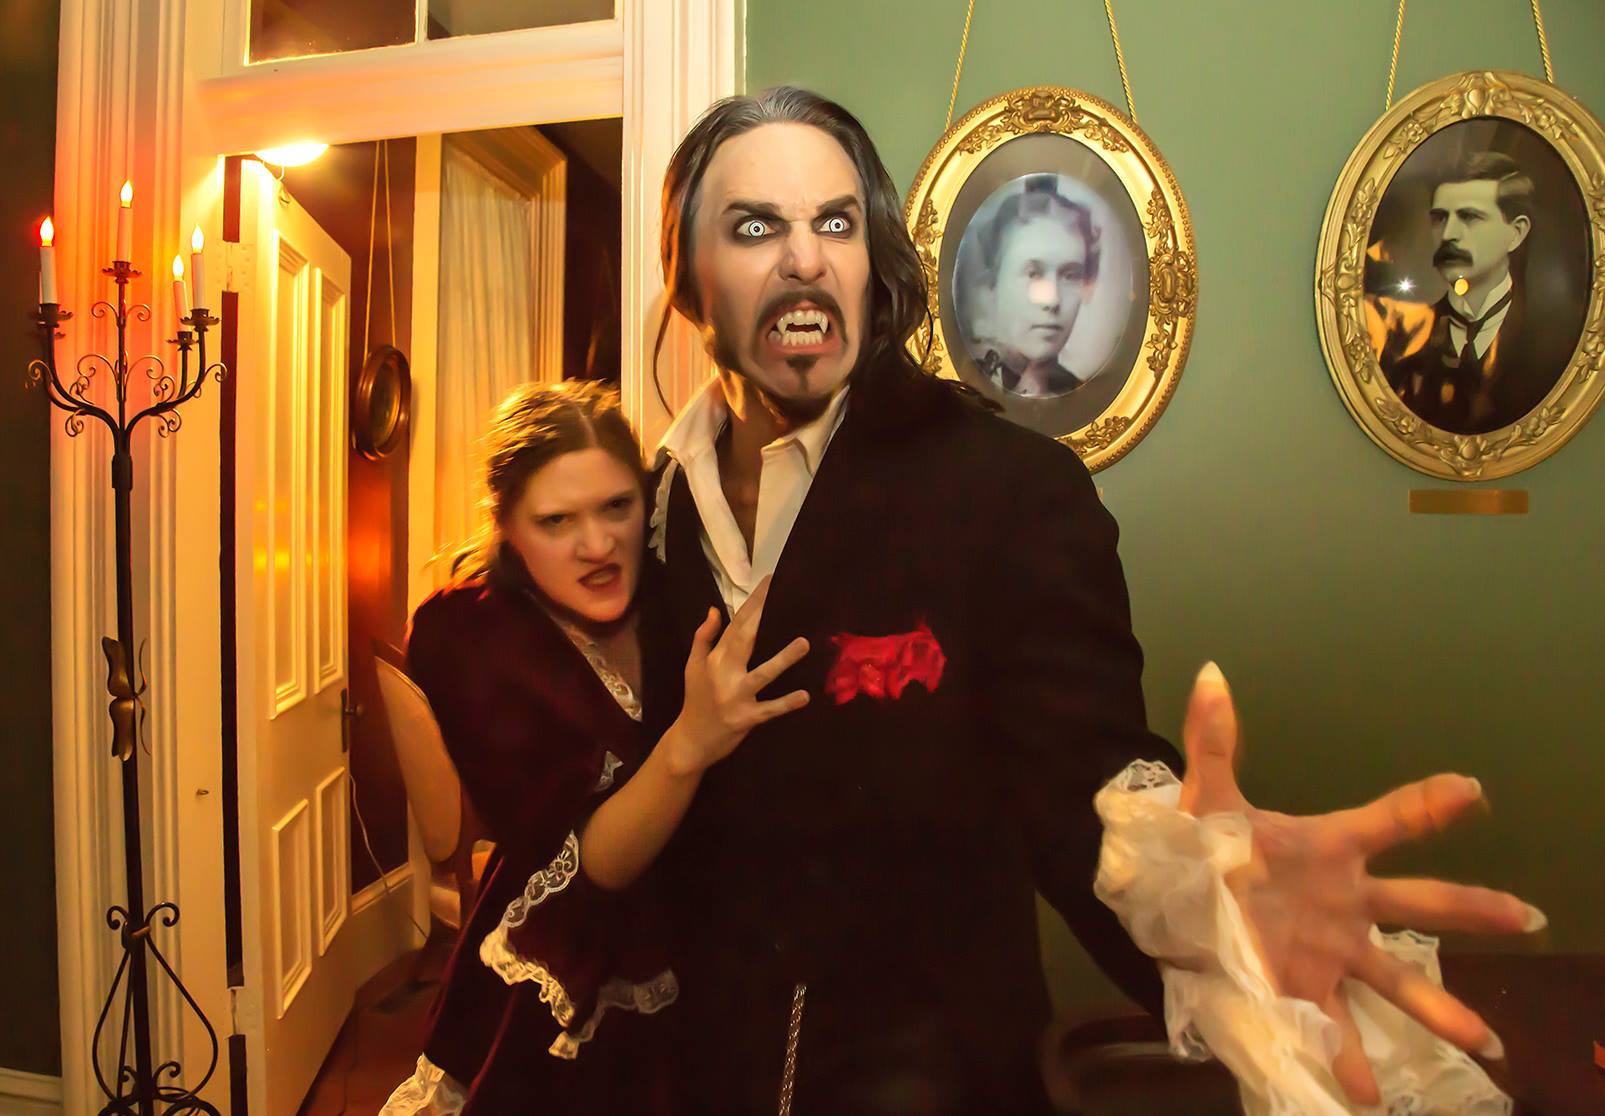 Still of Matt Wiggins as Dracula and cast member from the 2013 live production of Bram Stokers Dracula.